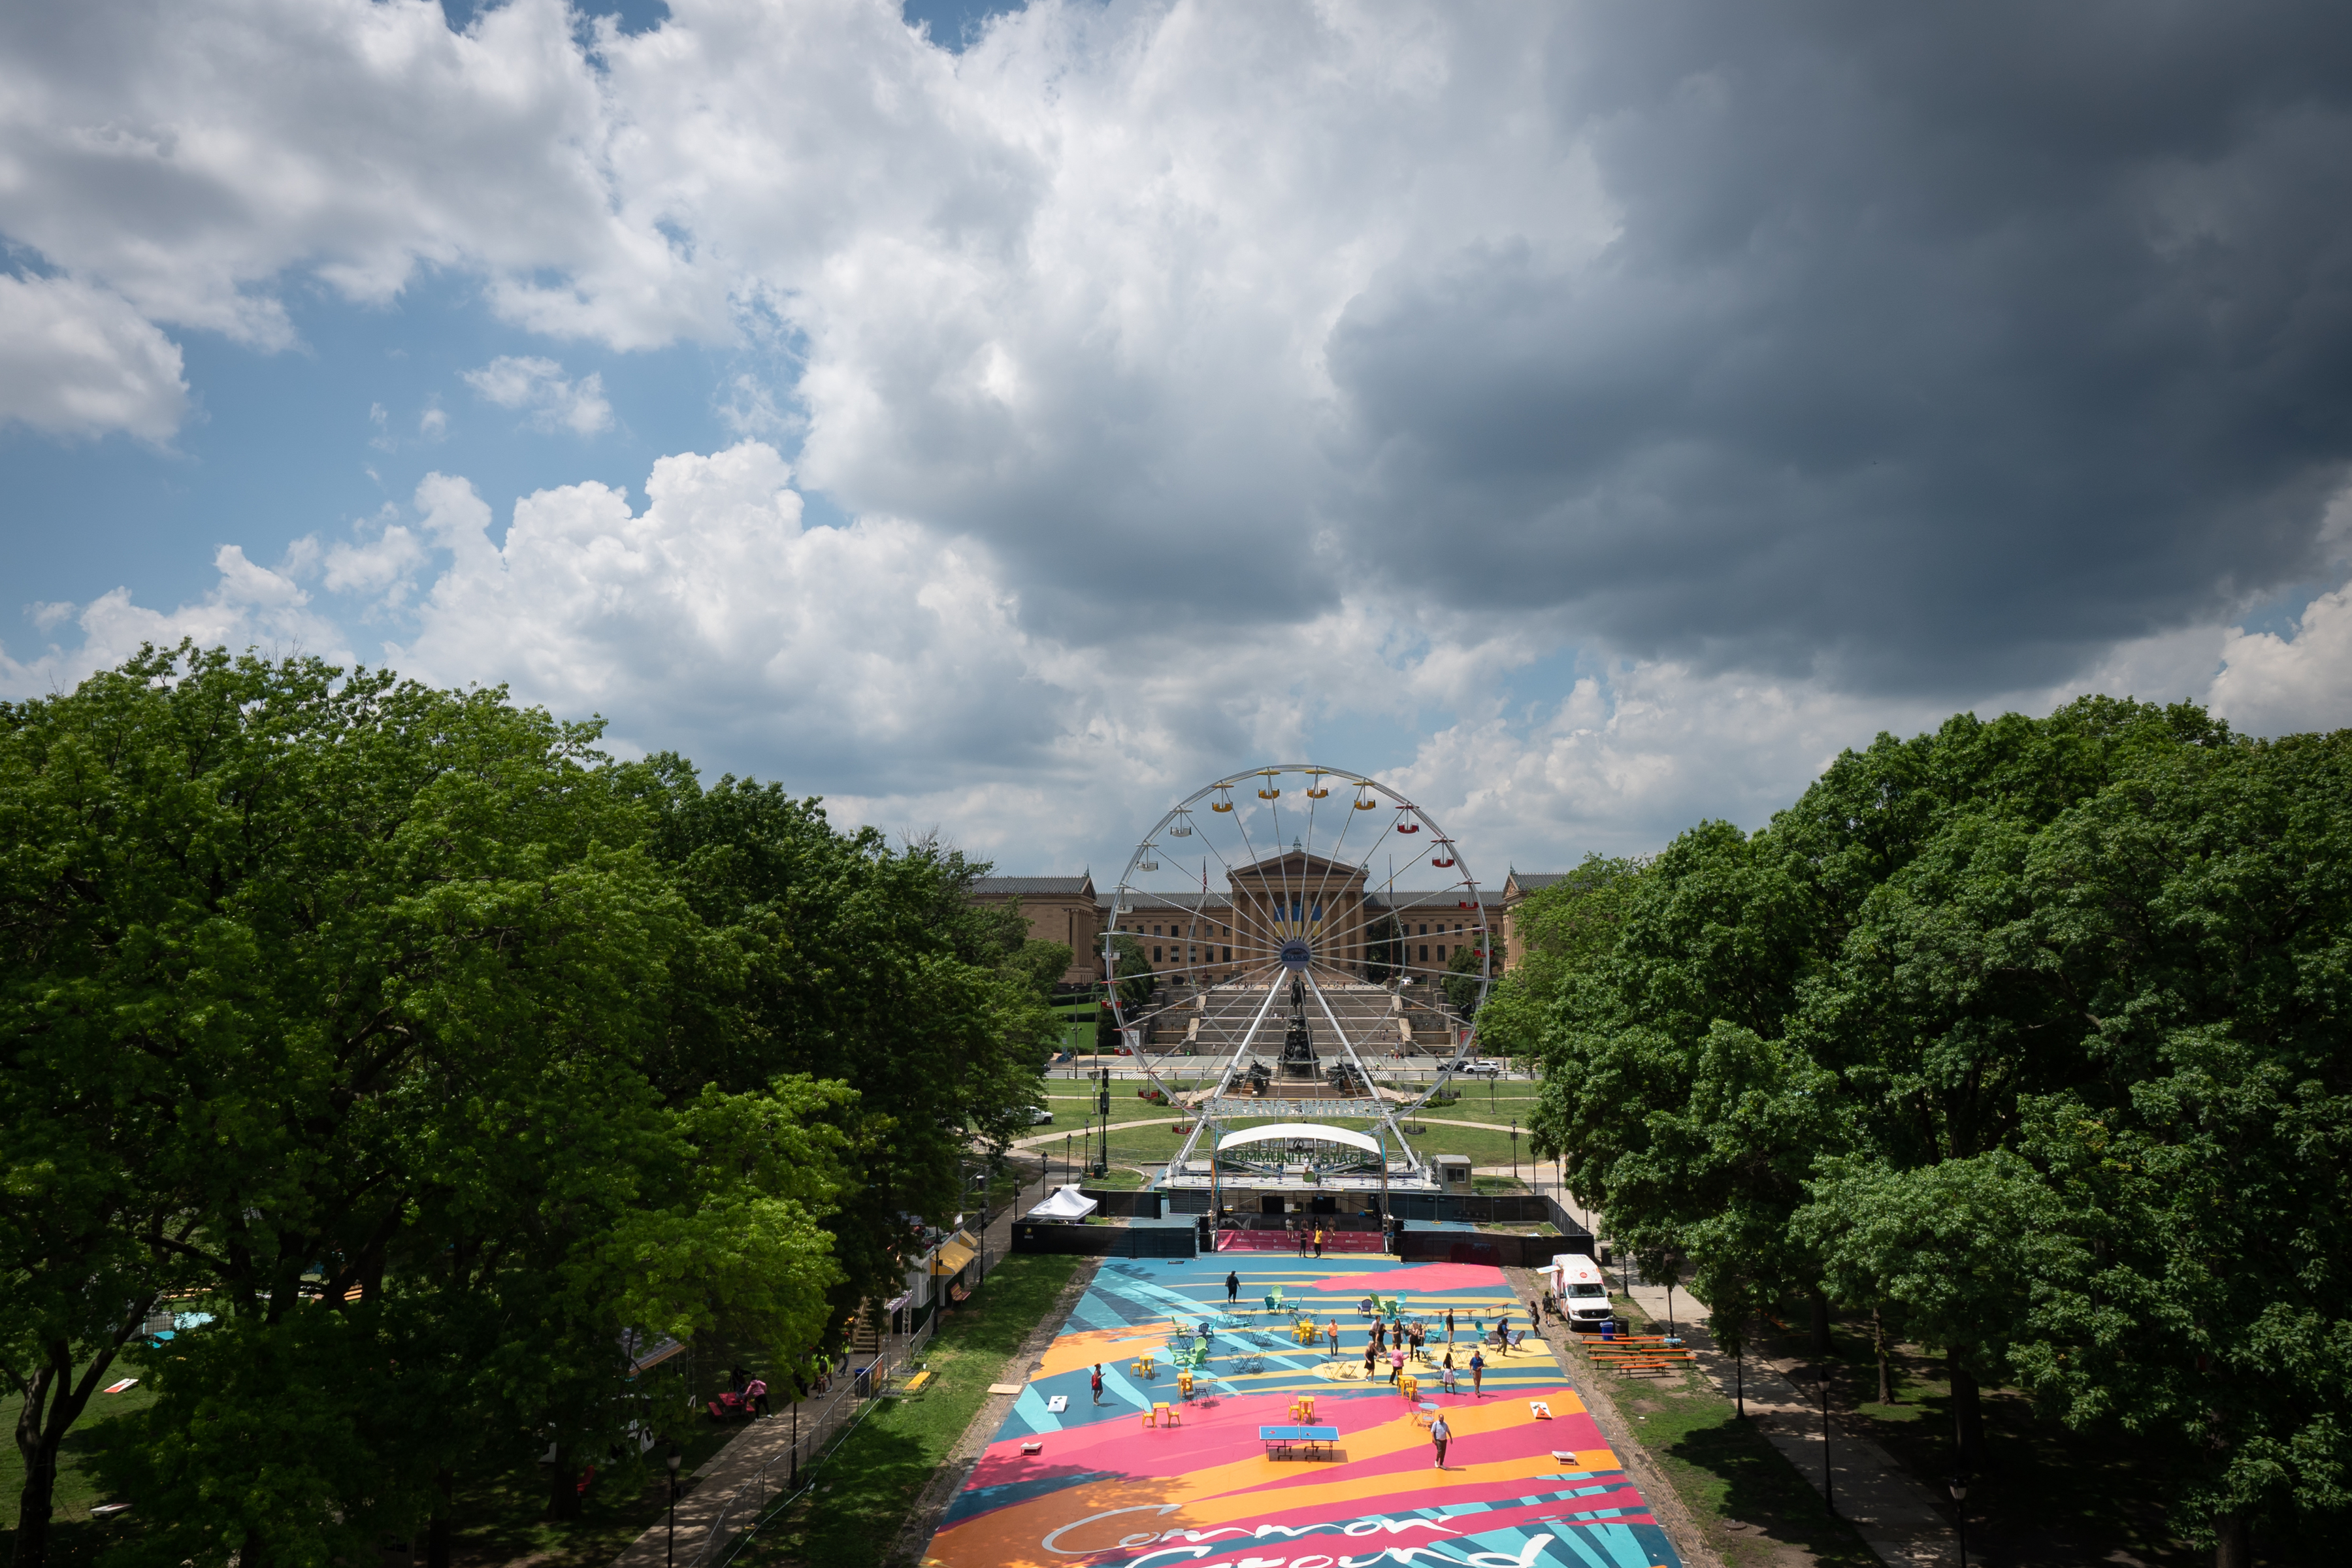 The Oval+ to open on the Parkway with new art installation